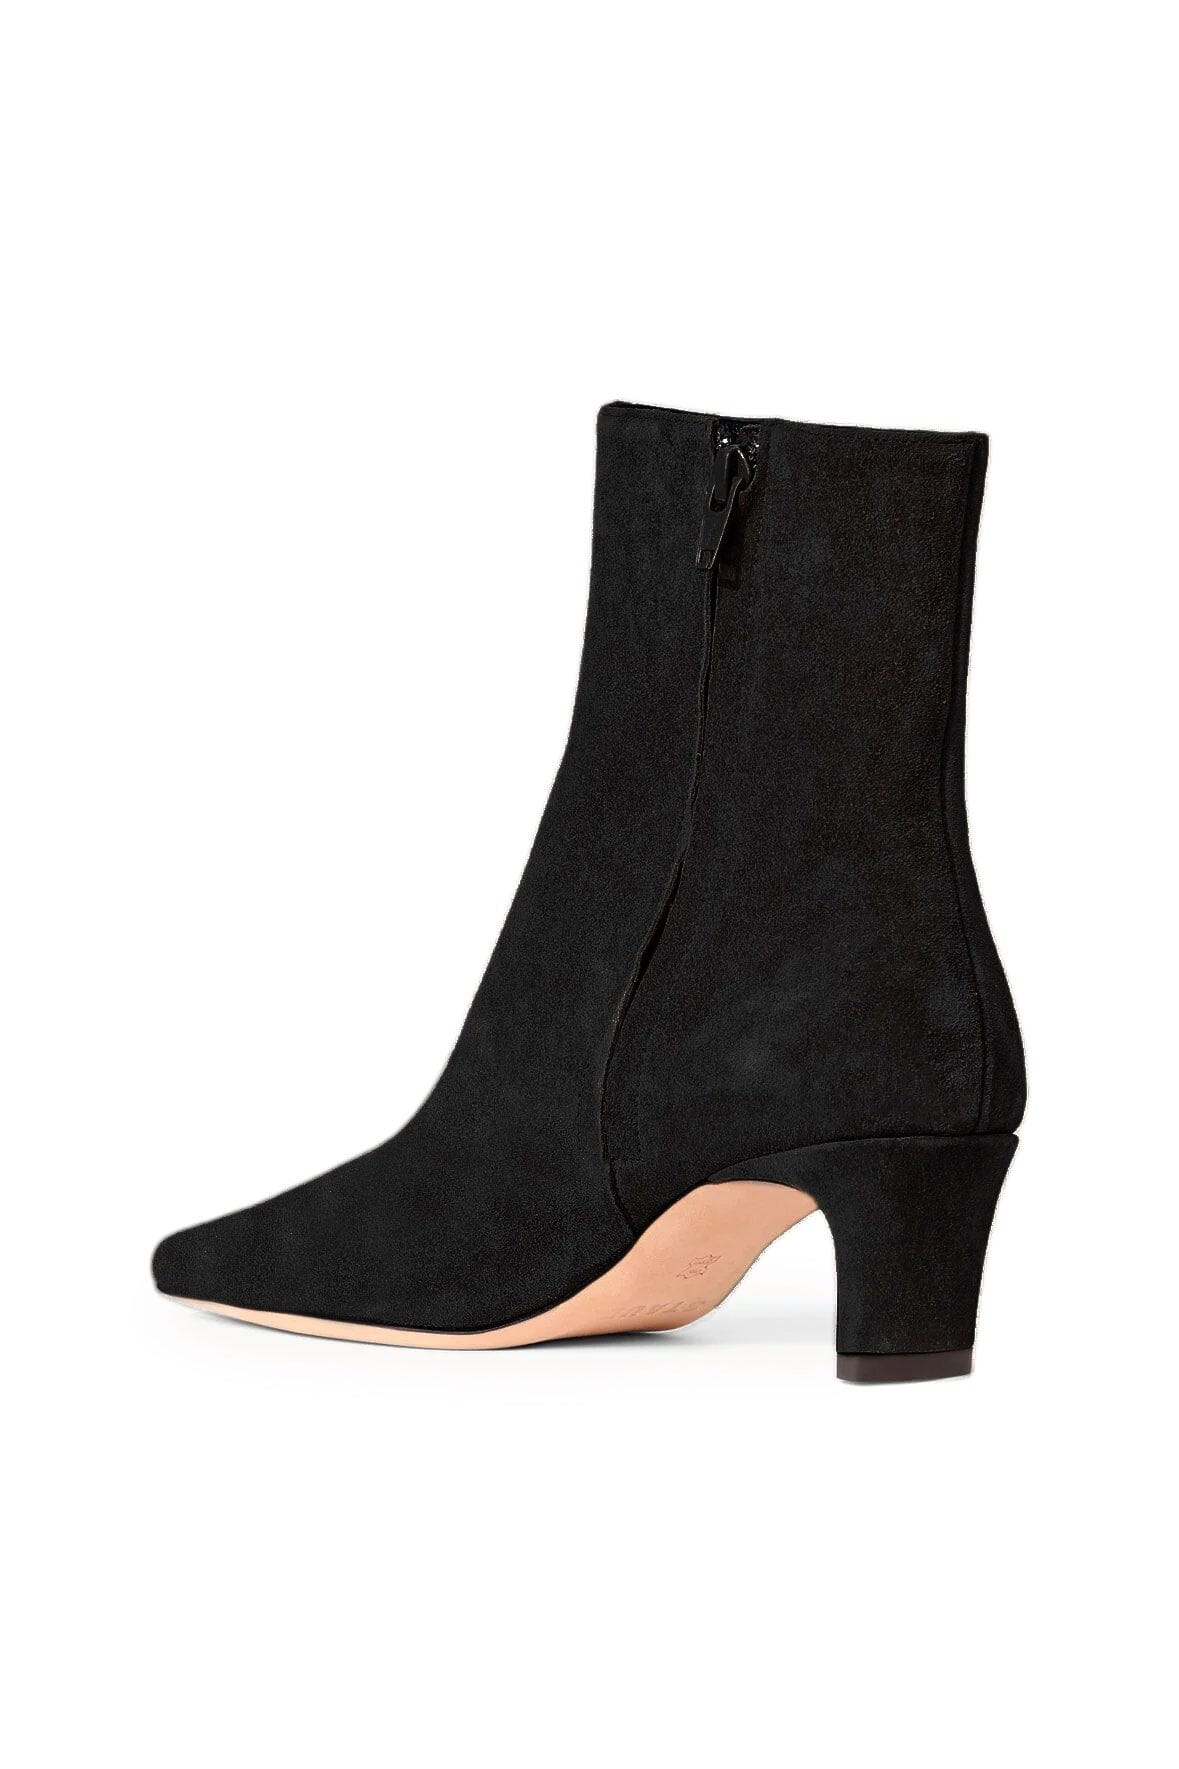 Wally Ankle Boot, Black Suede